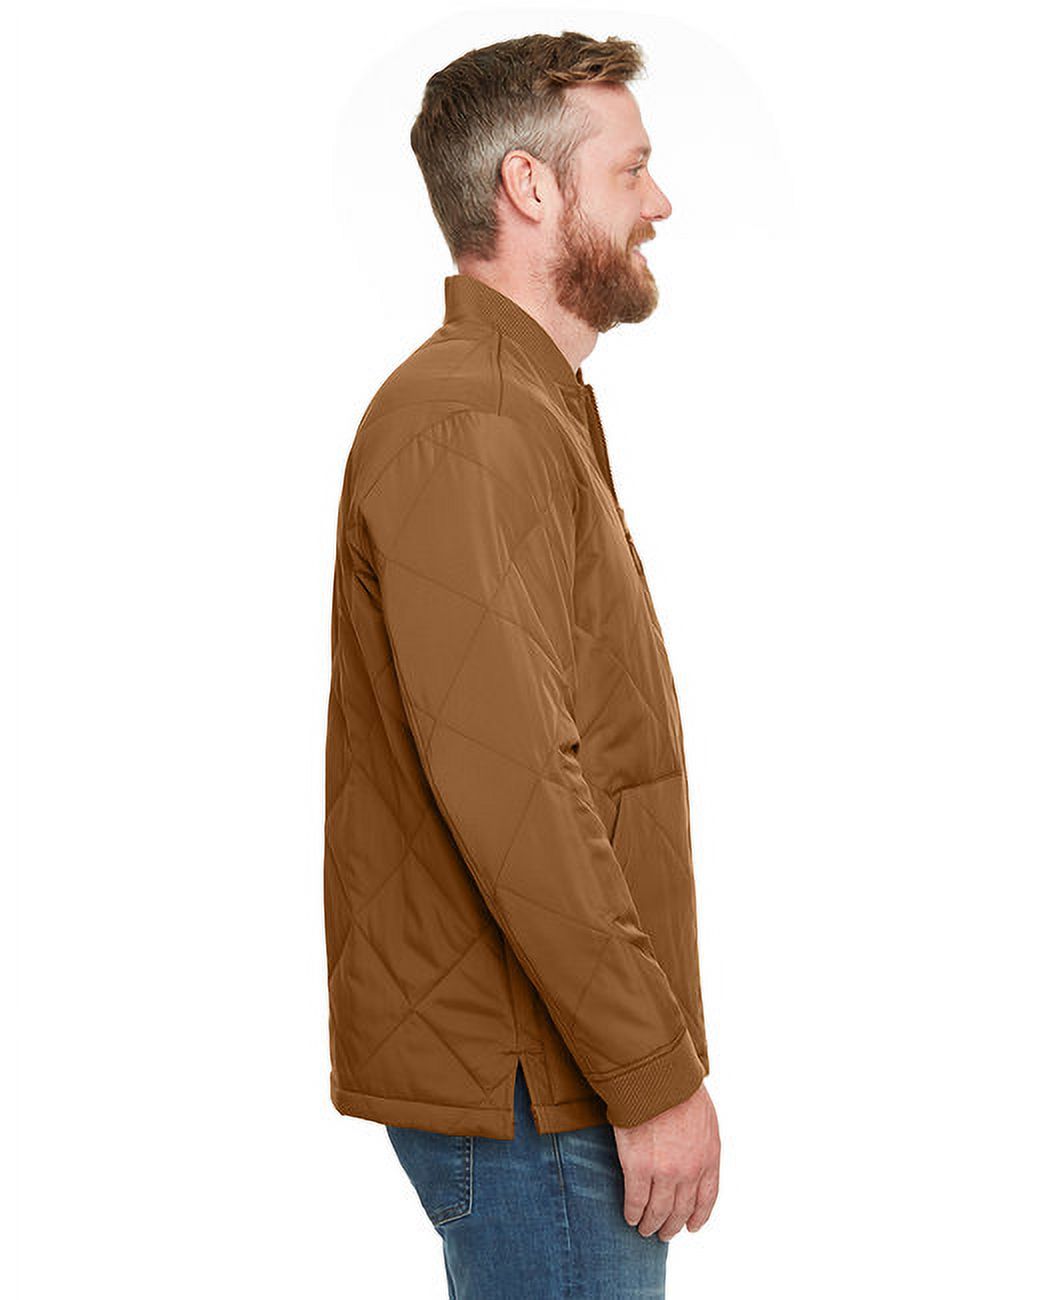 Adult Dockside Insulated Utility Jacket - DUCK BROWN - M - image 3 of 3